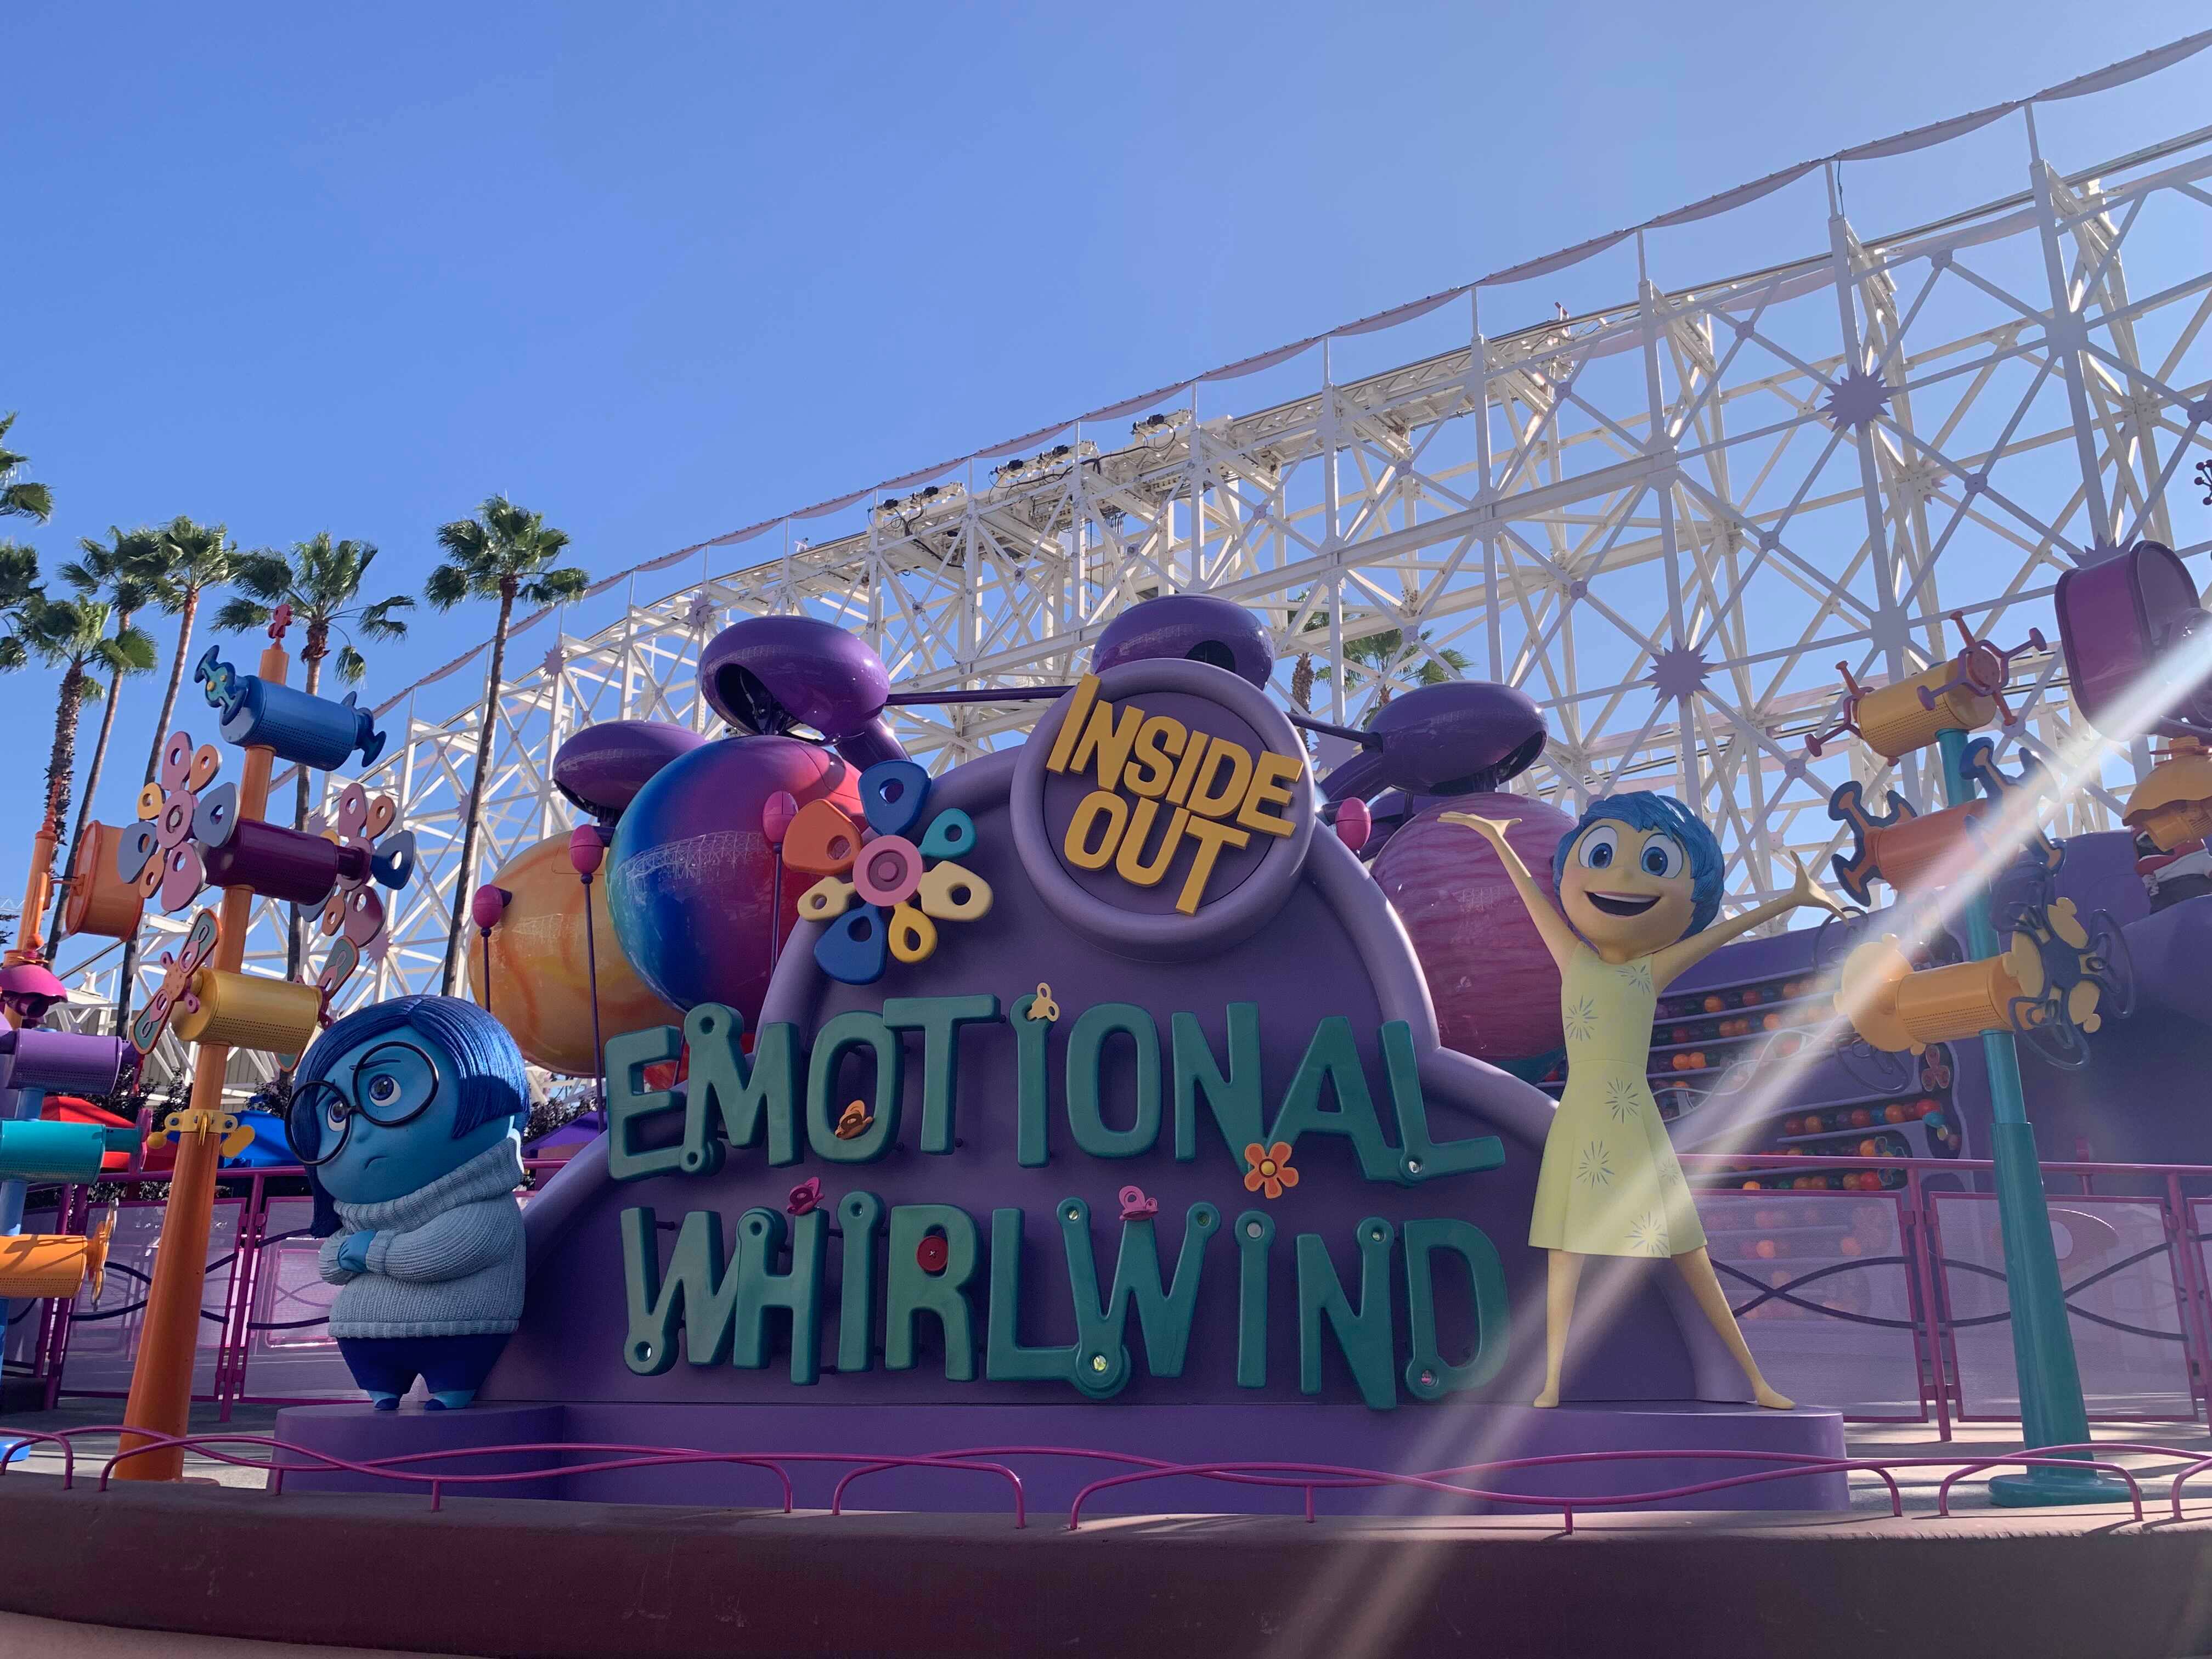 Inside Out Emotional Whirlwind Attraction Opens at Disneyland!